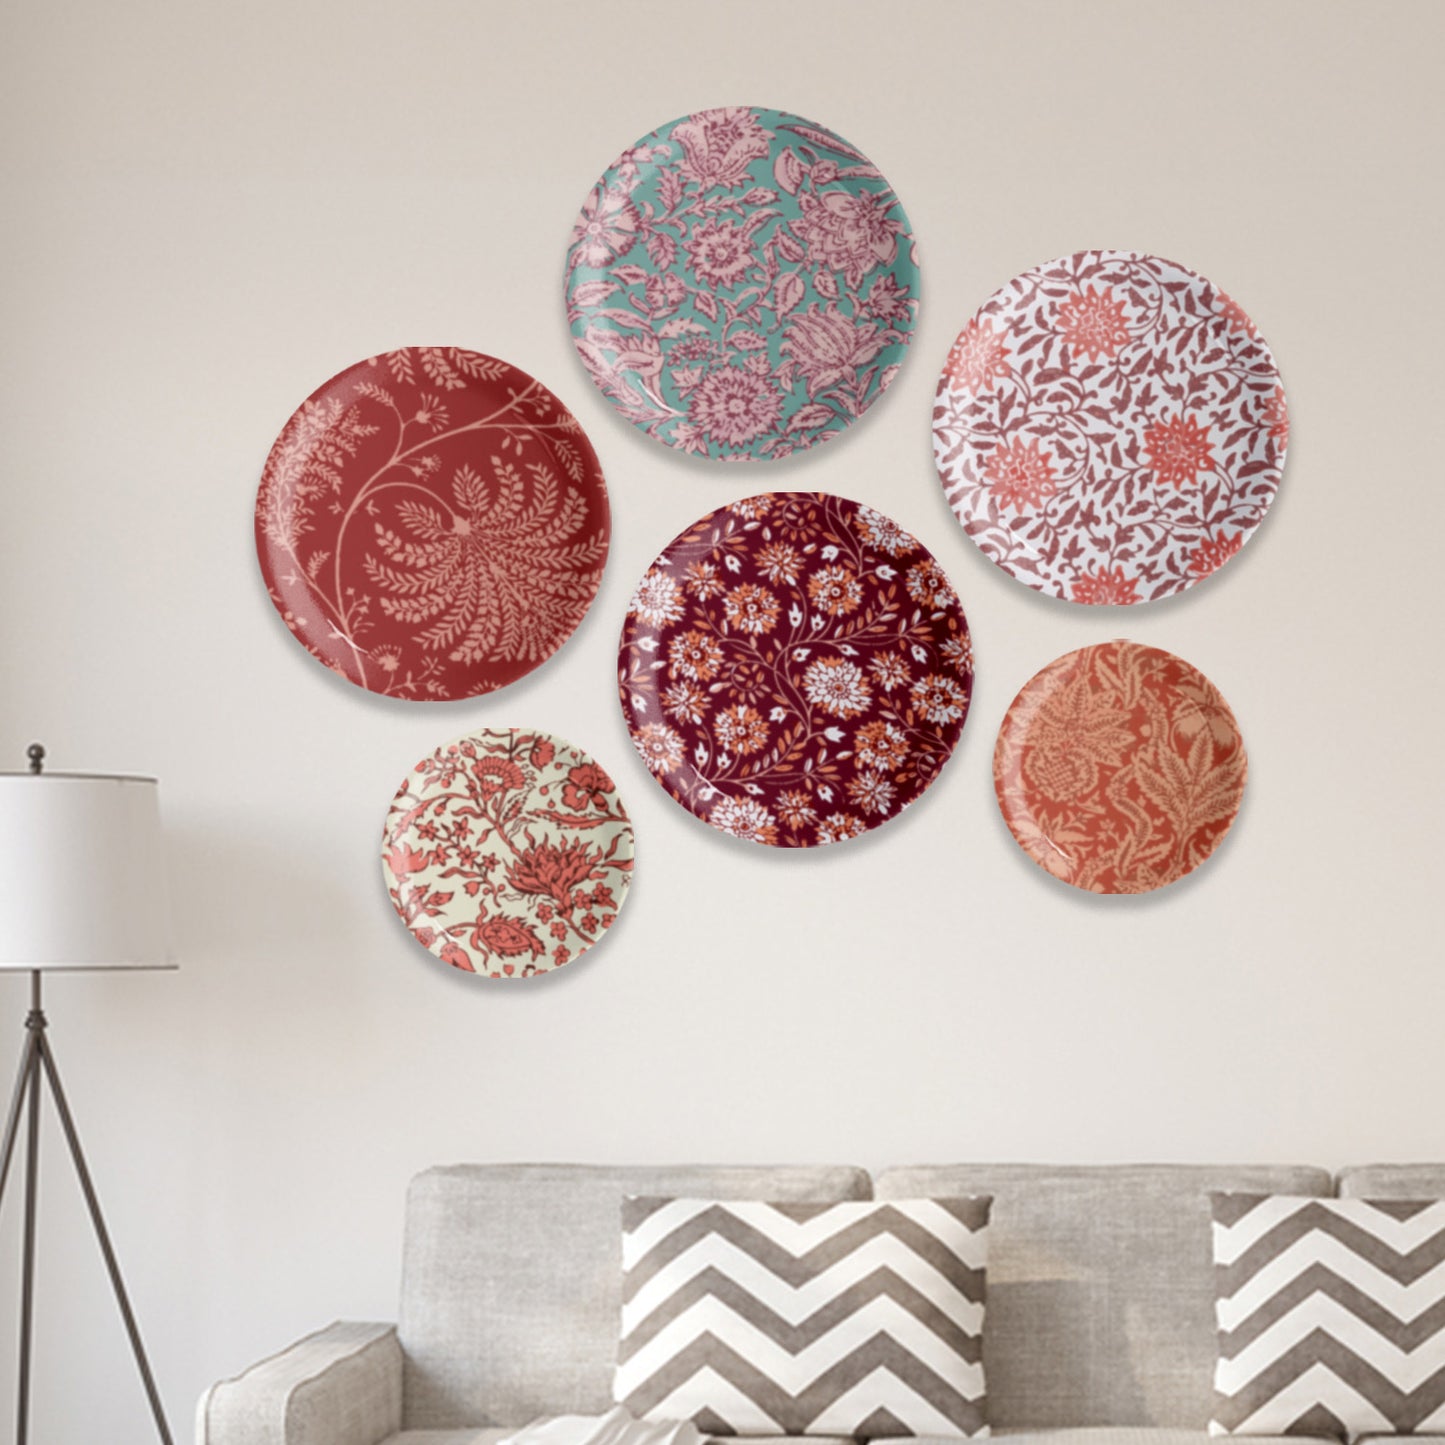 Ethnic Floral Printed Wall Plate White Base